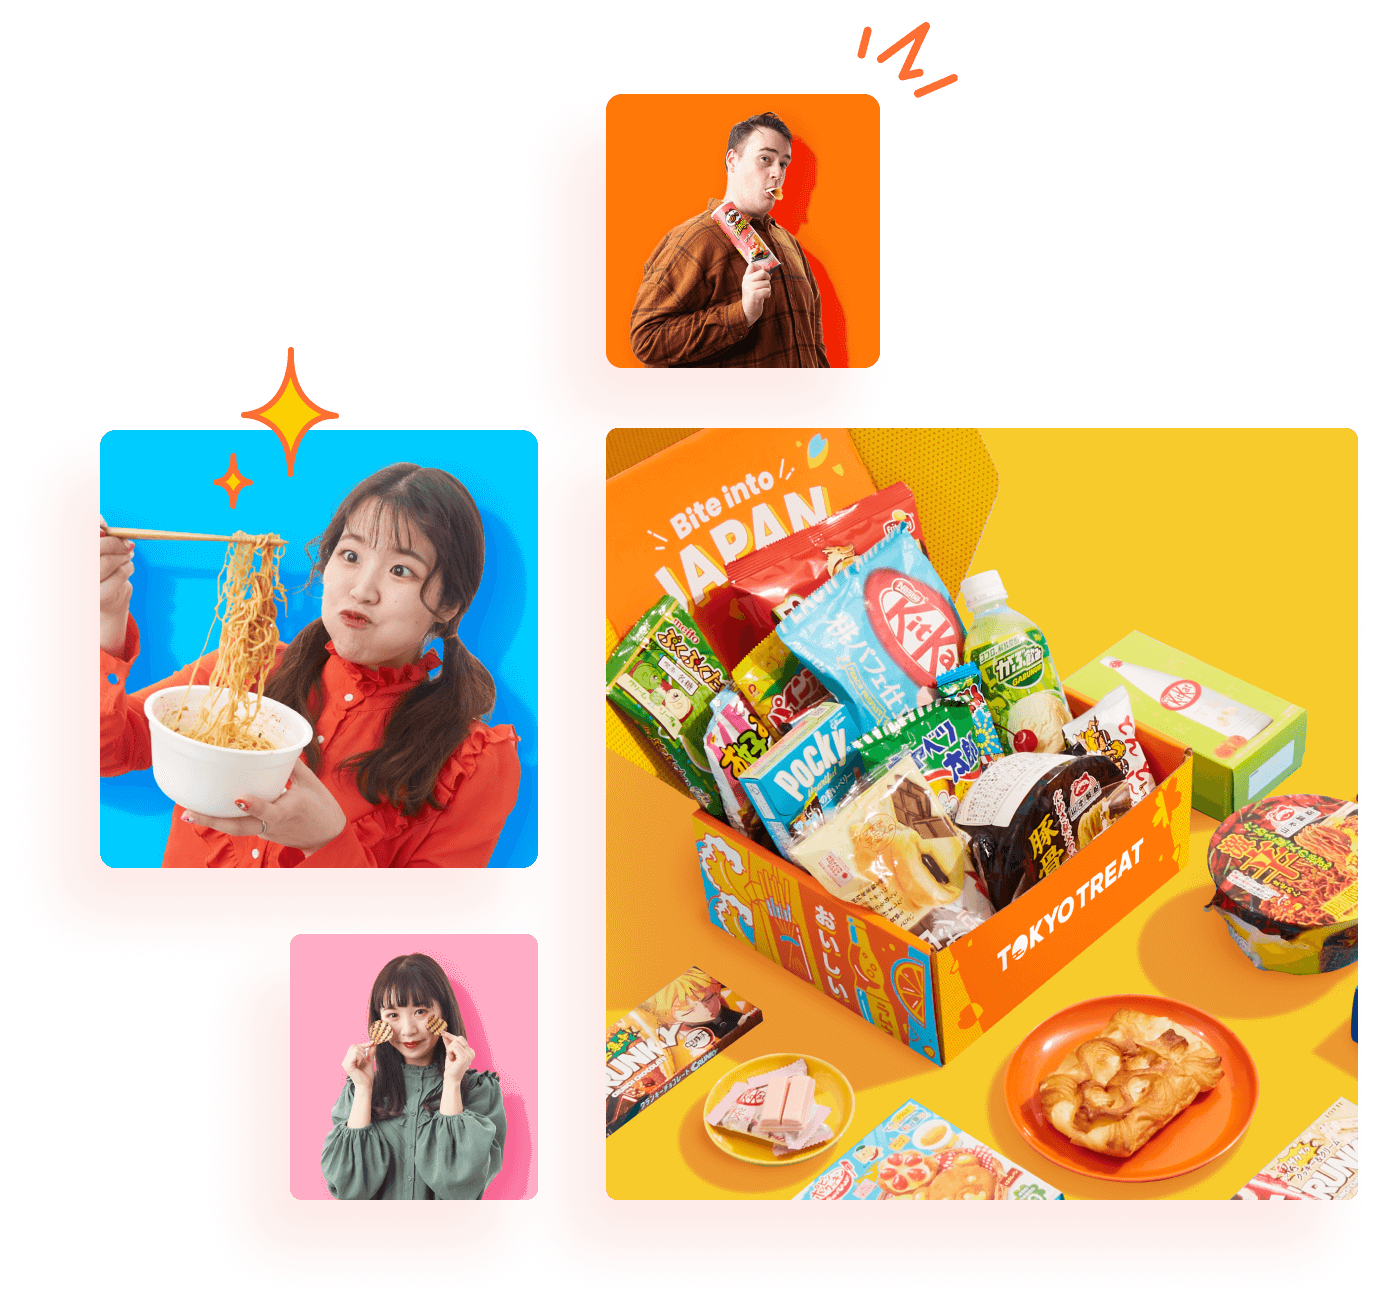 Make Someone’s Day with a box full of Japanese Snacks